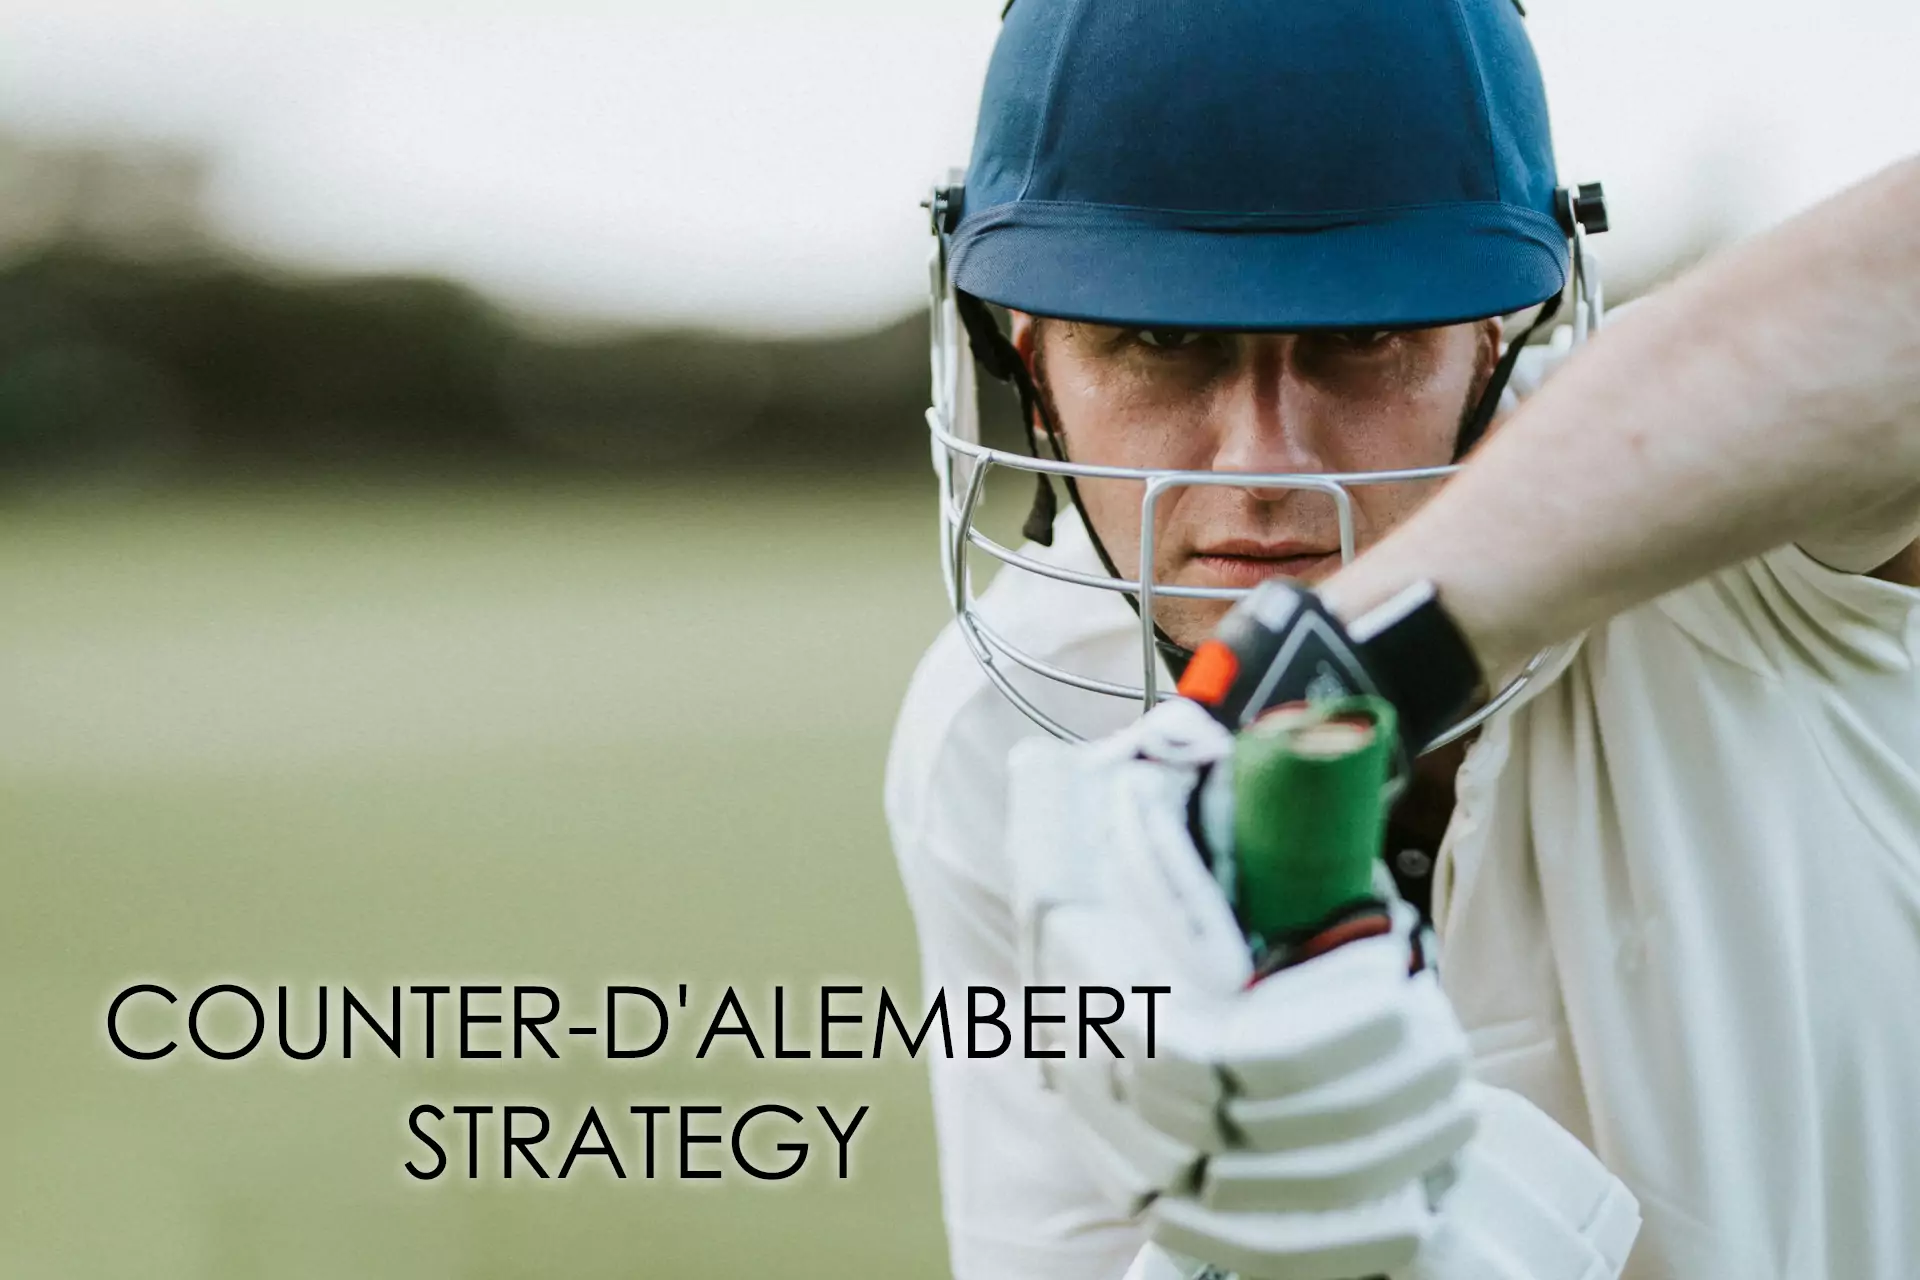 The Counter-d'Alembert Strategy can be a solution for live cricket betting.